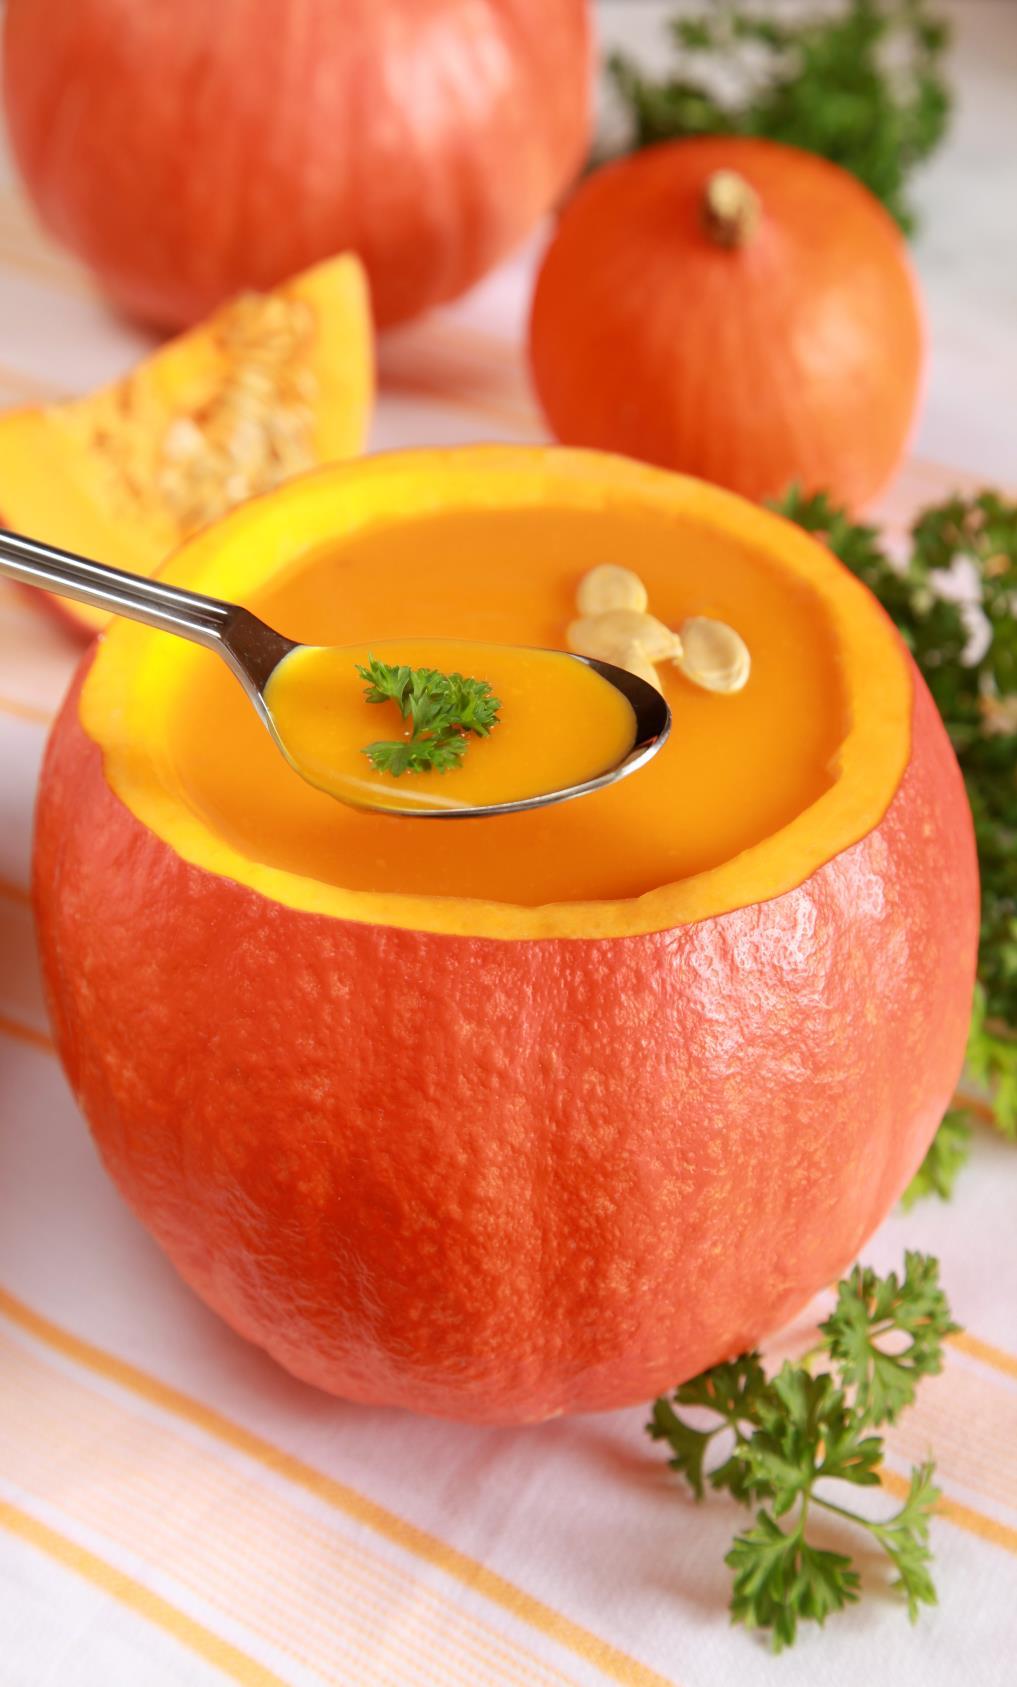 This appealing soup harvests the fall flavors of just-picked pumpkins and tart apples.